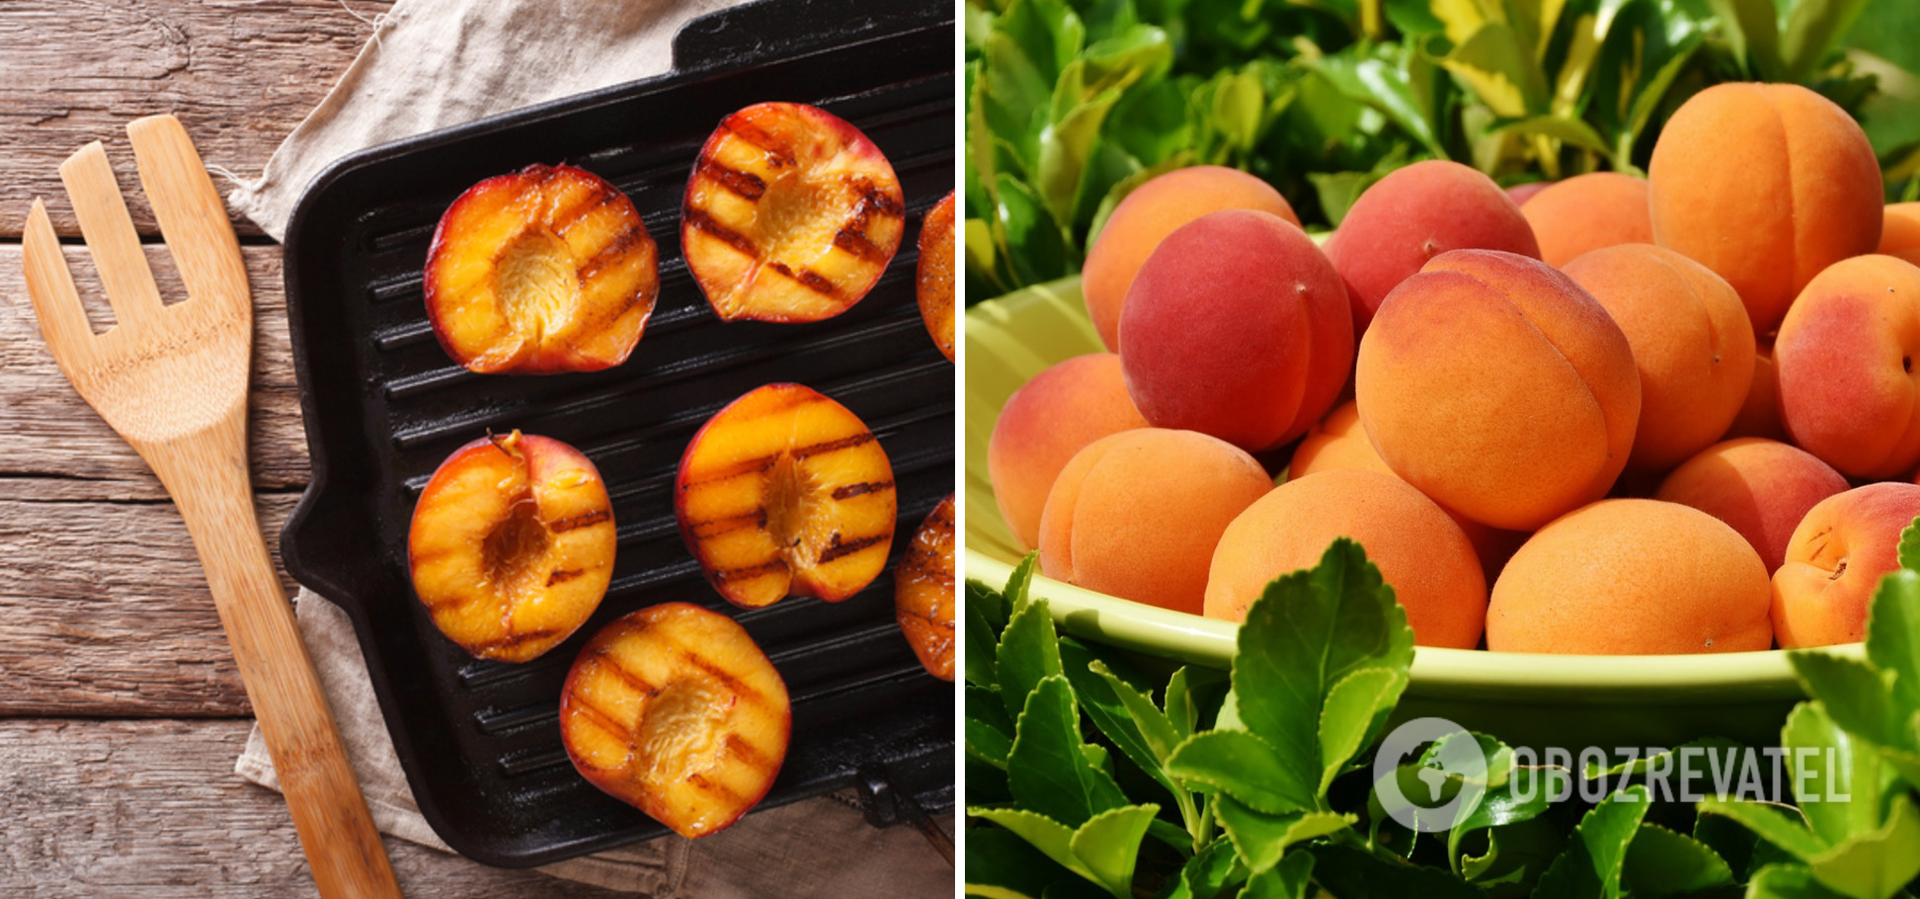 What to make with peaches